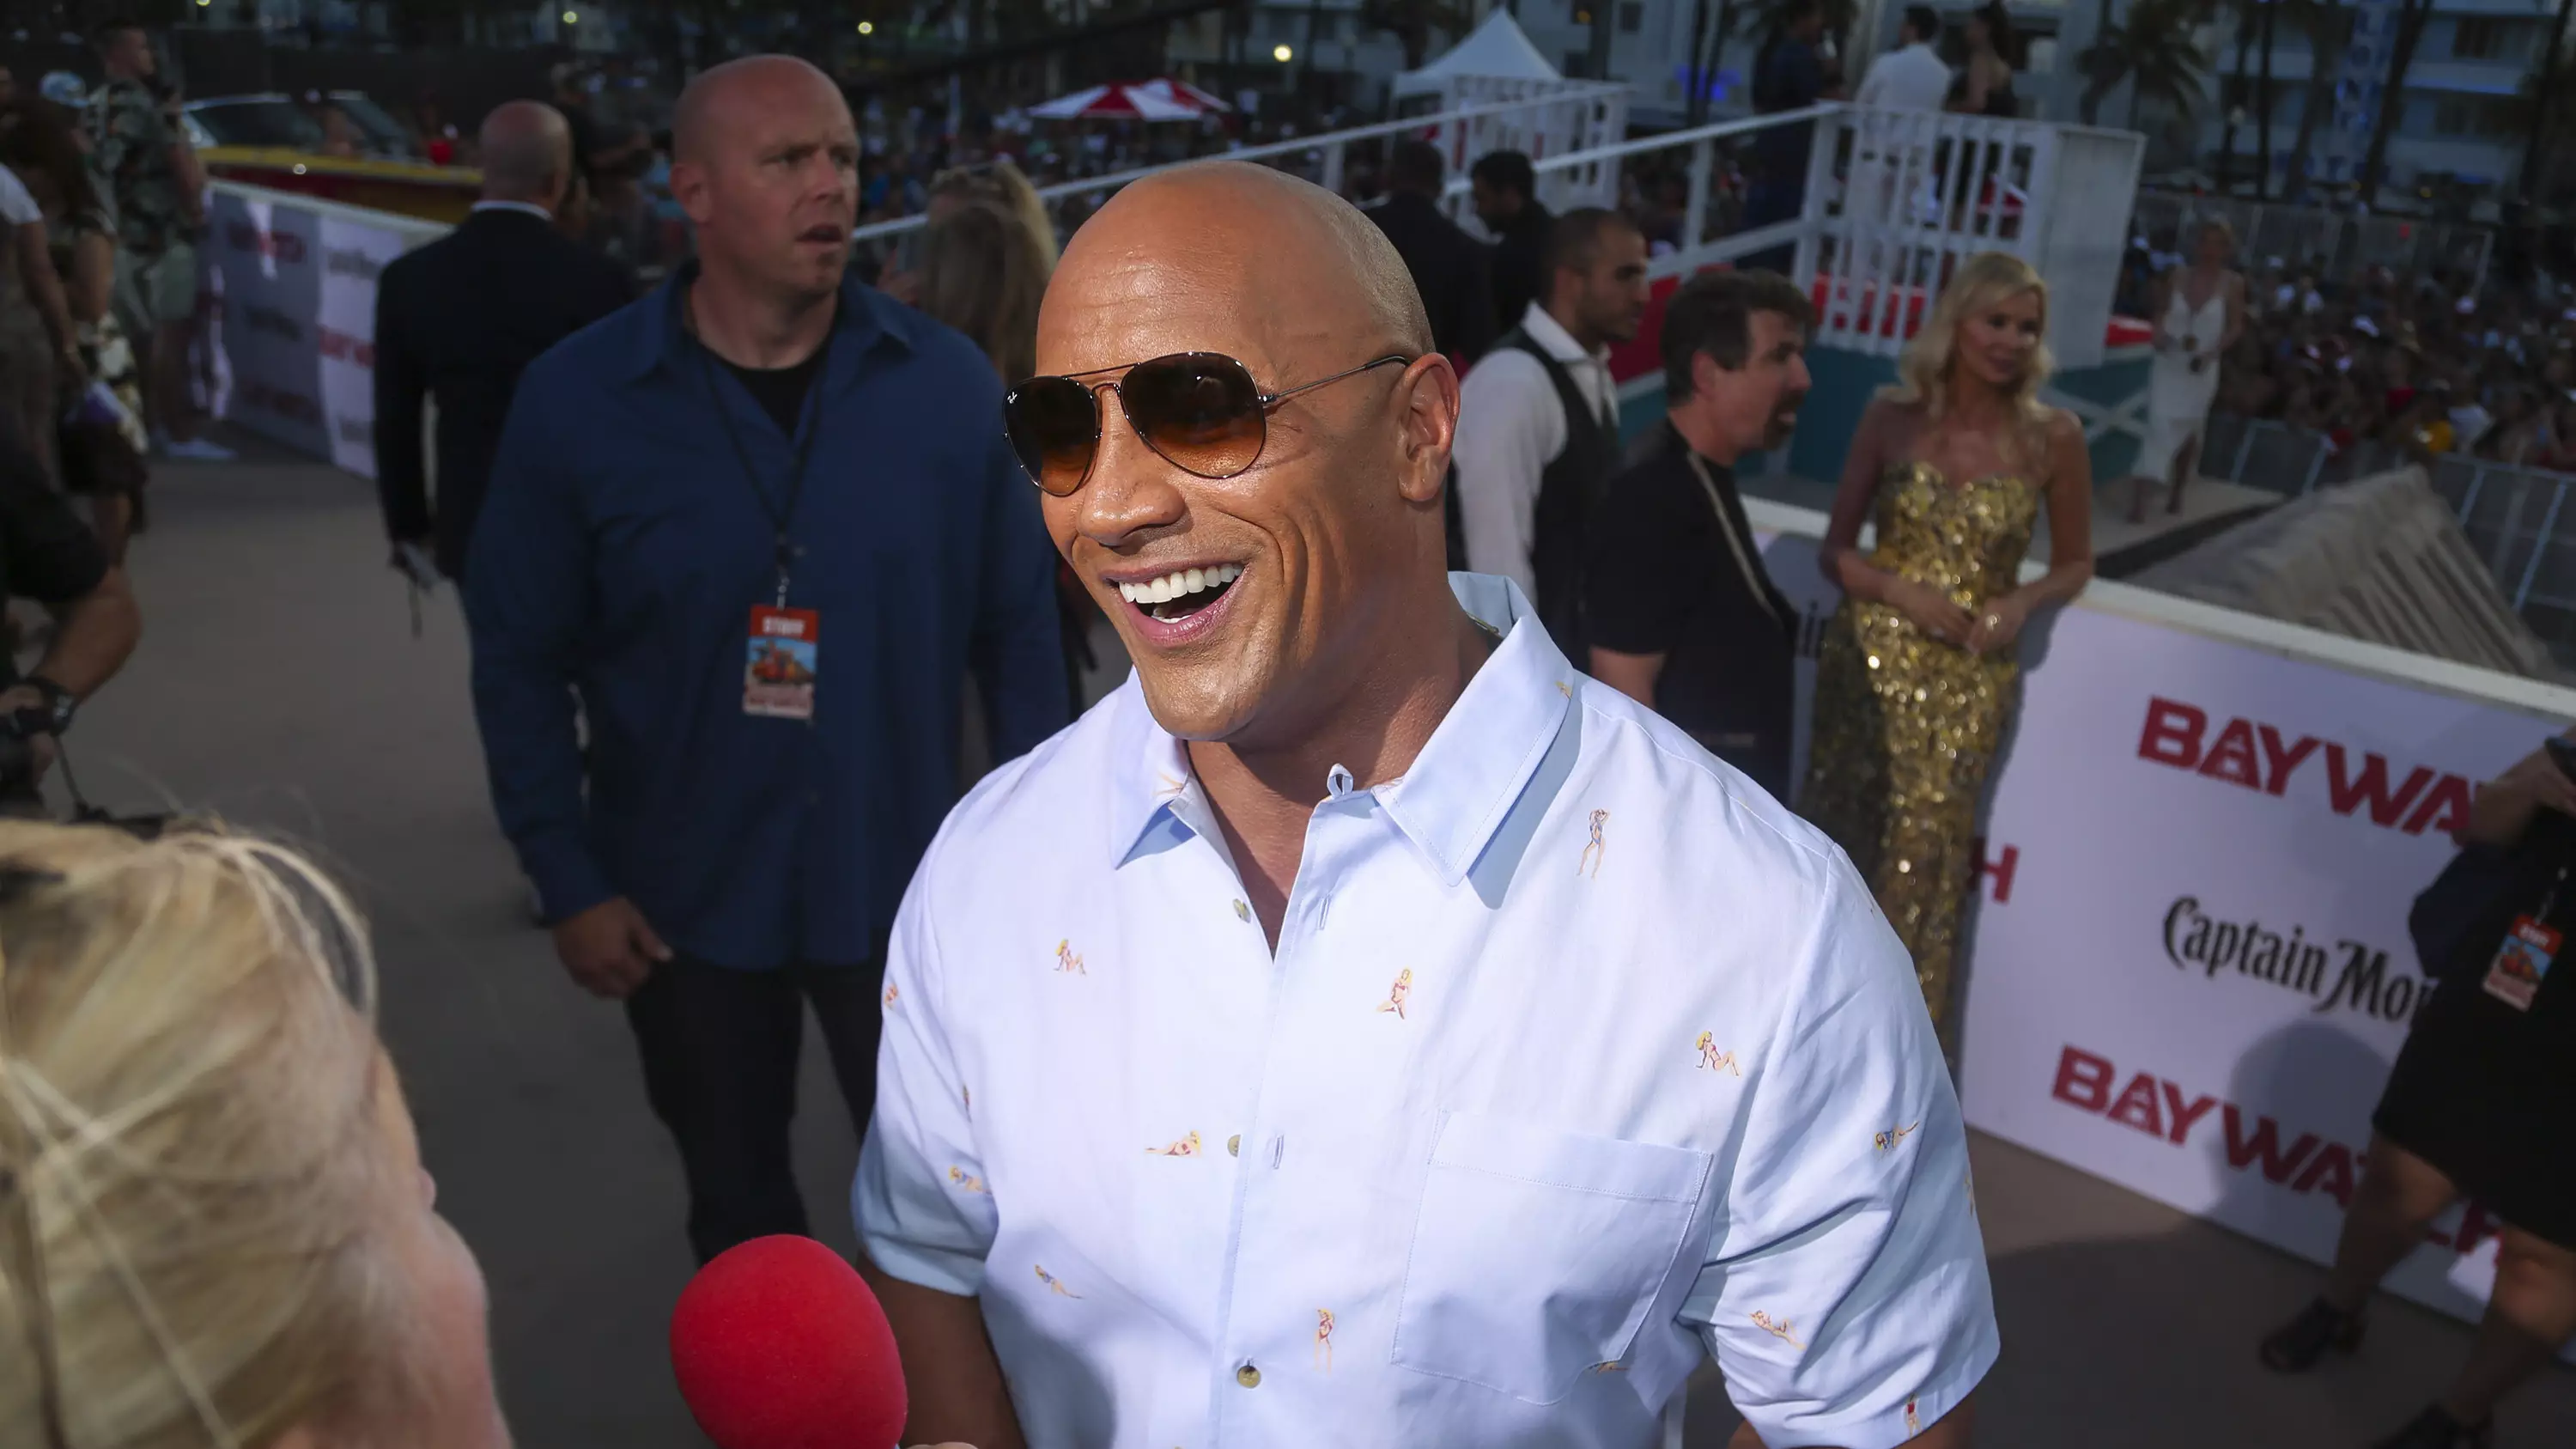 Dwayne Johnson Just Dropped A Pretty Big Hint About Running For President